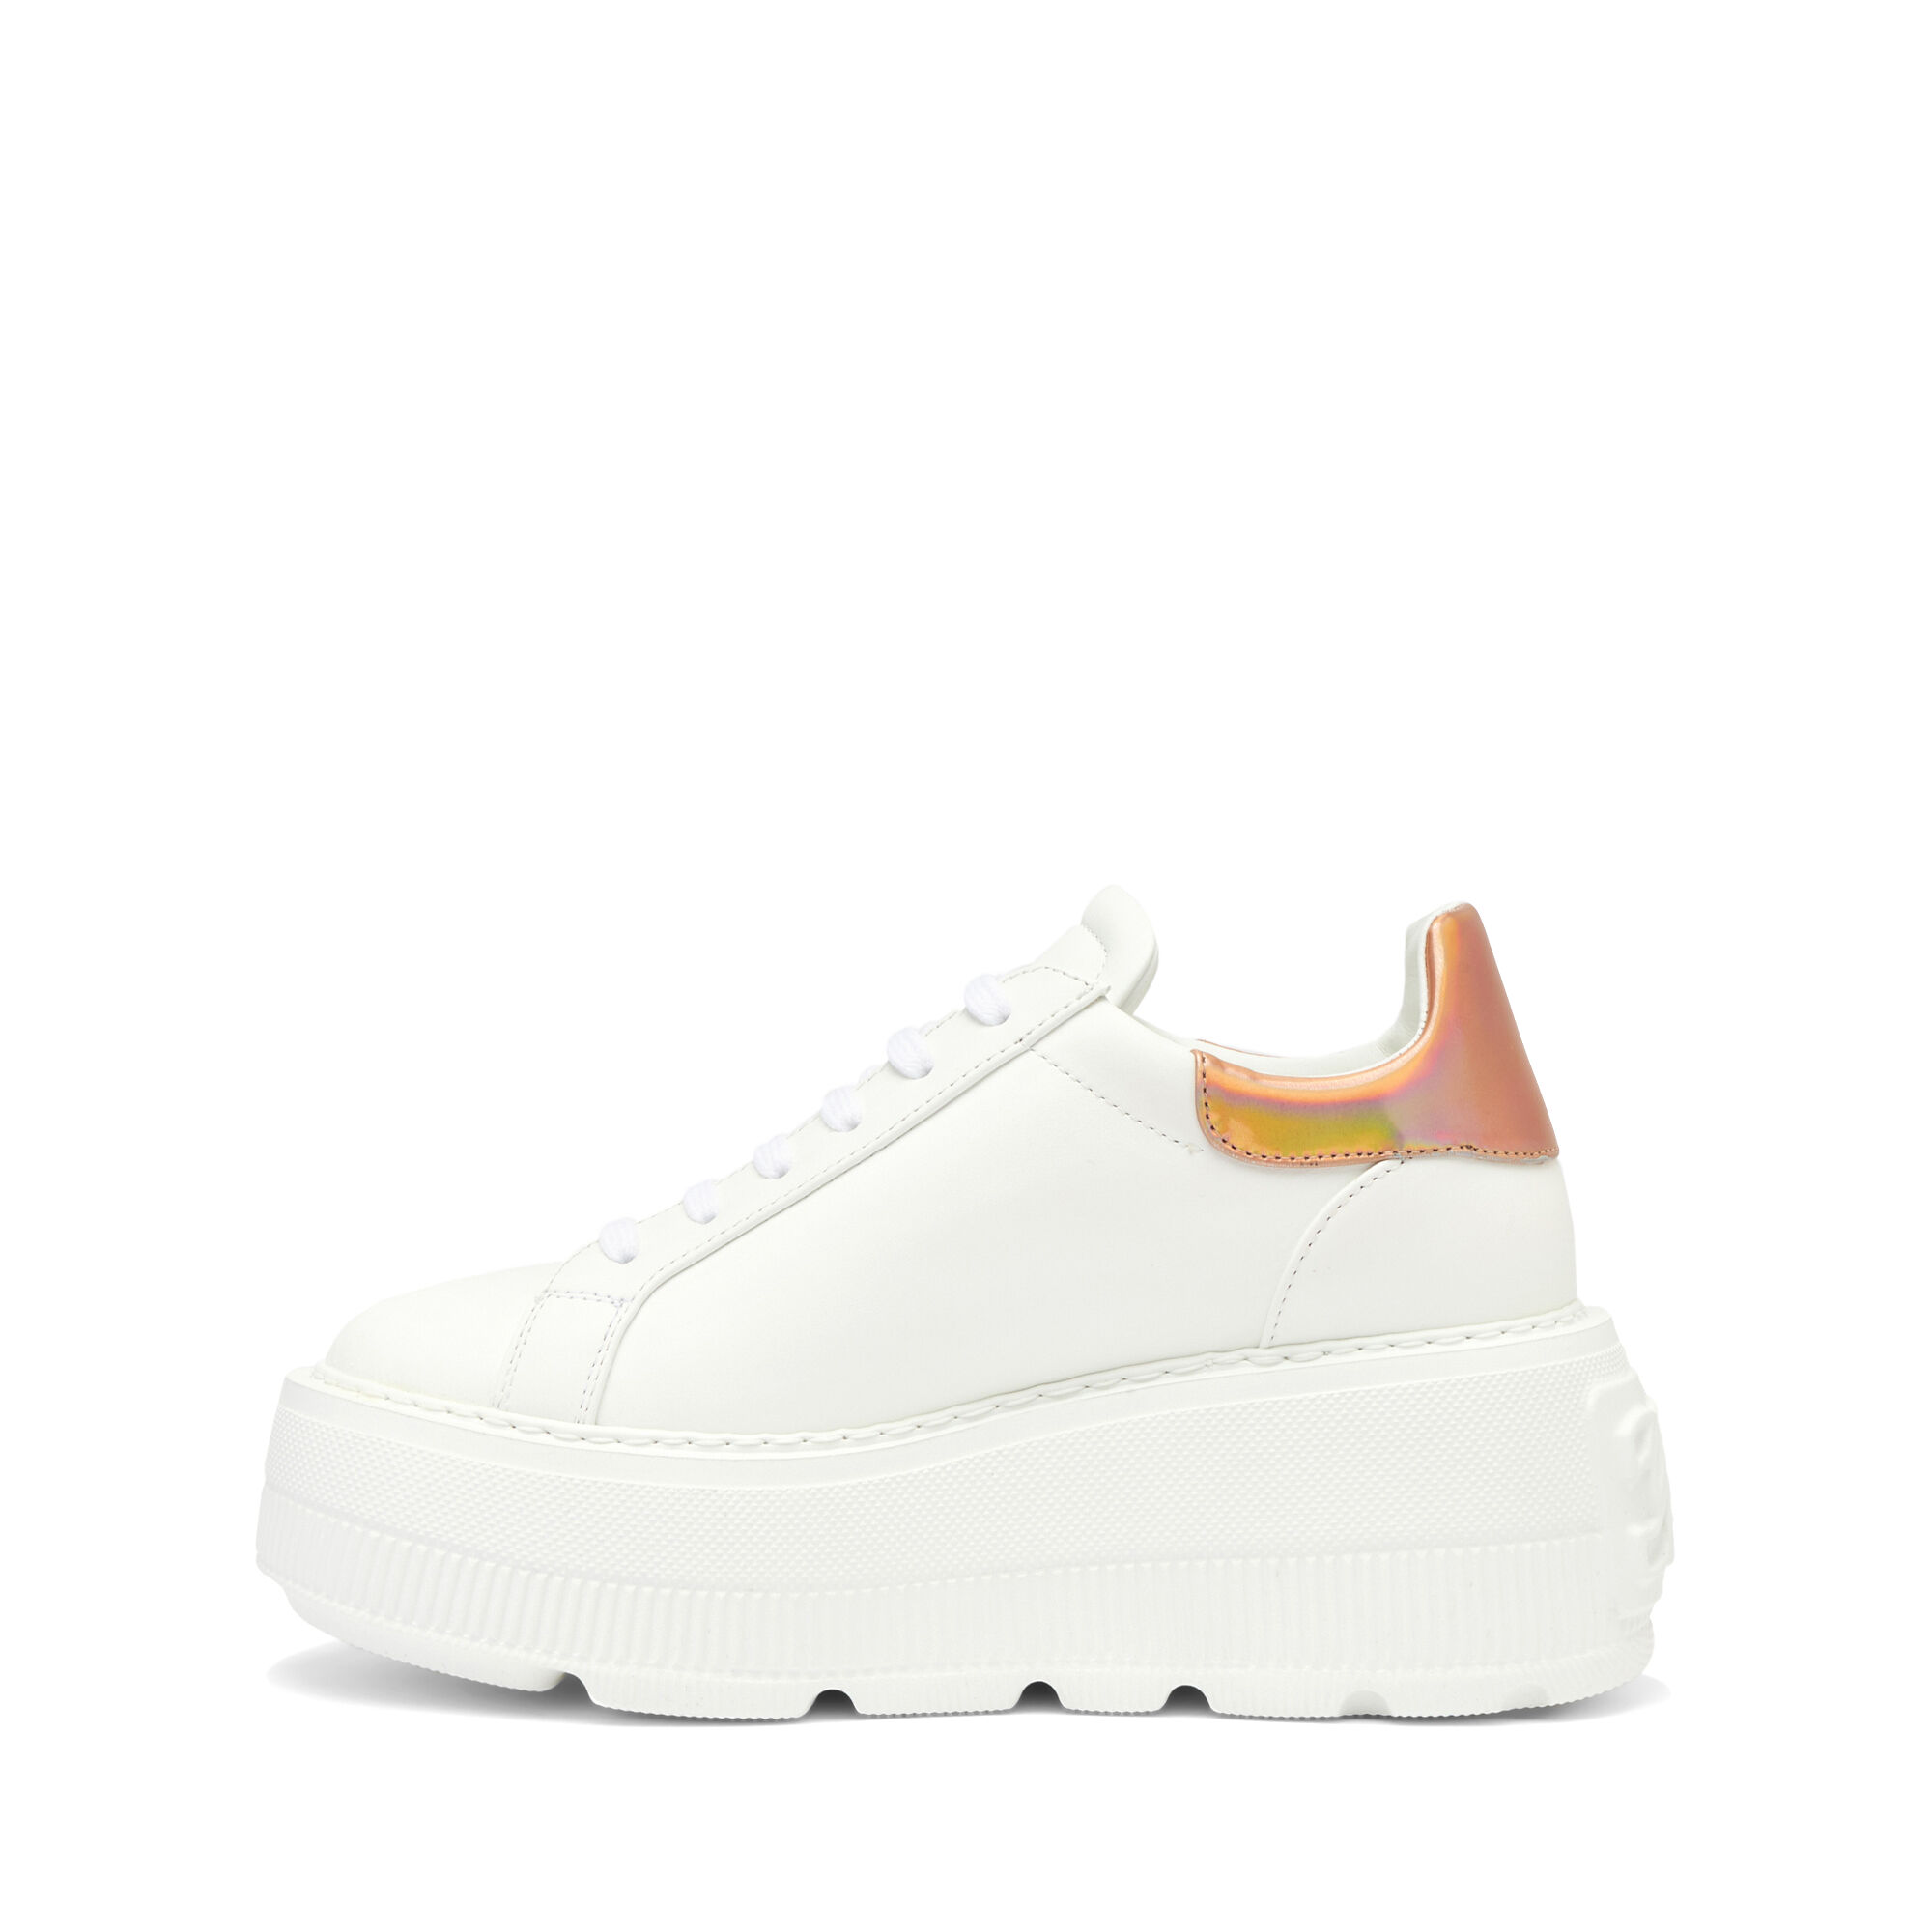 Nexus Flash Sneakers XXL Sole in White and Rose Gold for Women 